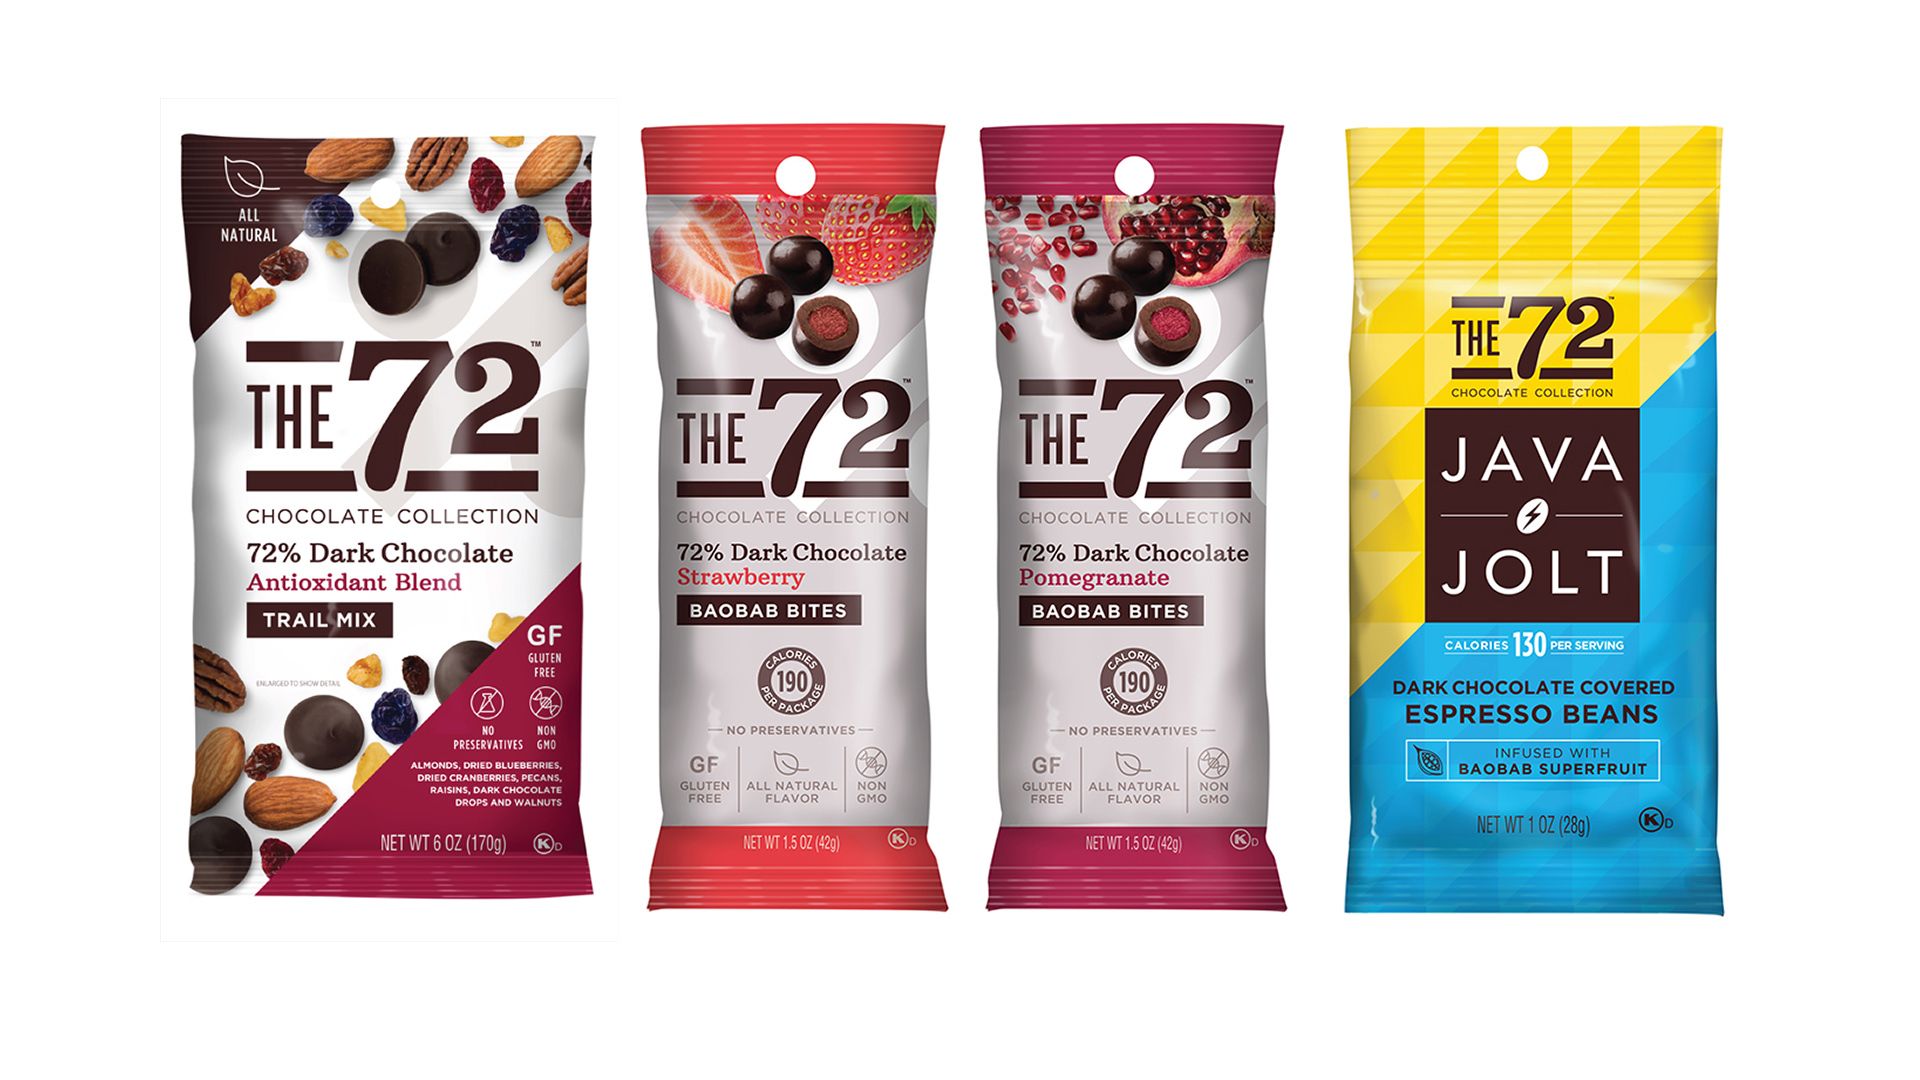 Review: The 72 Chocolate Collection